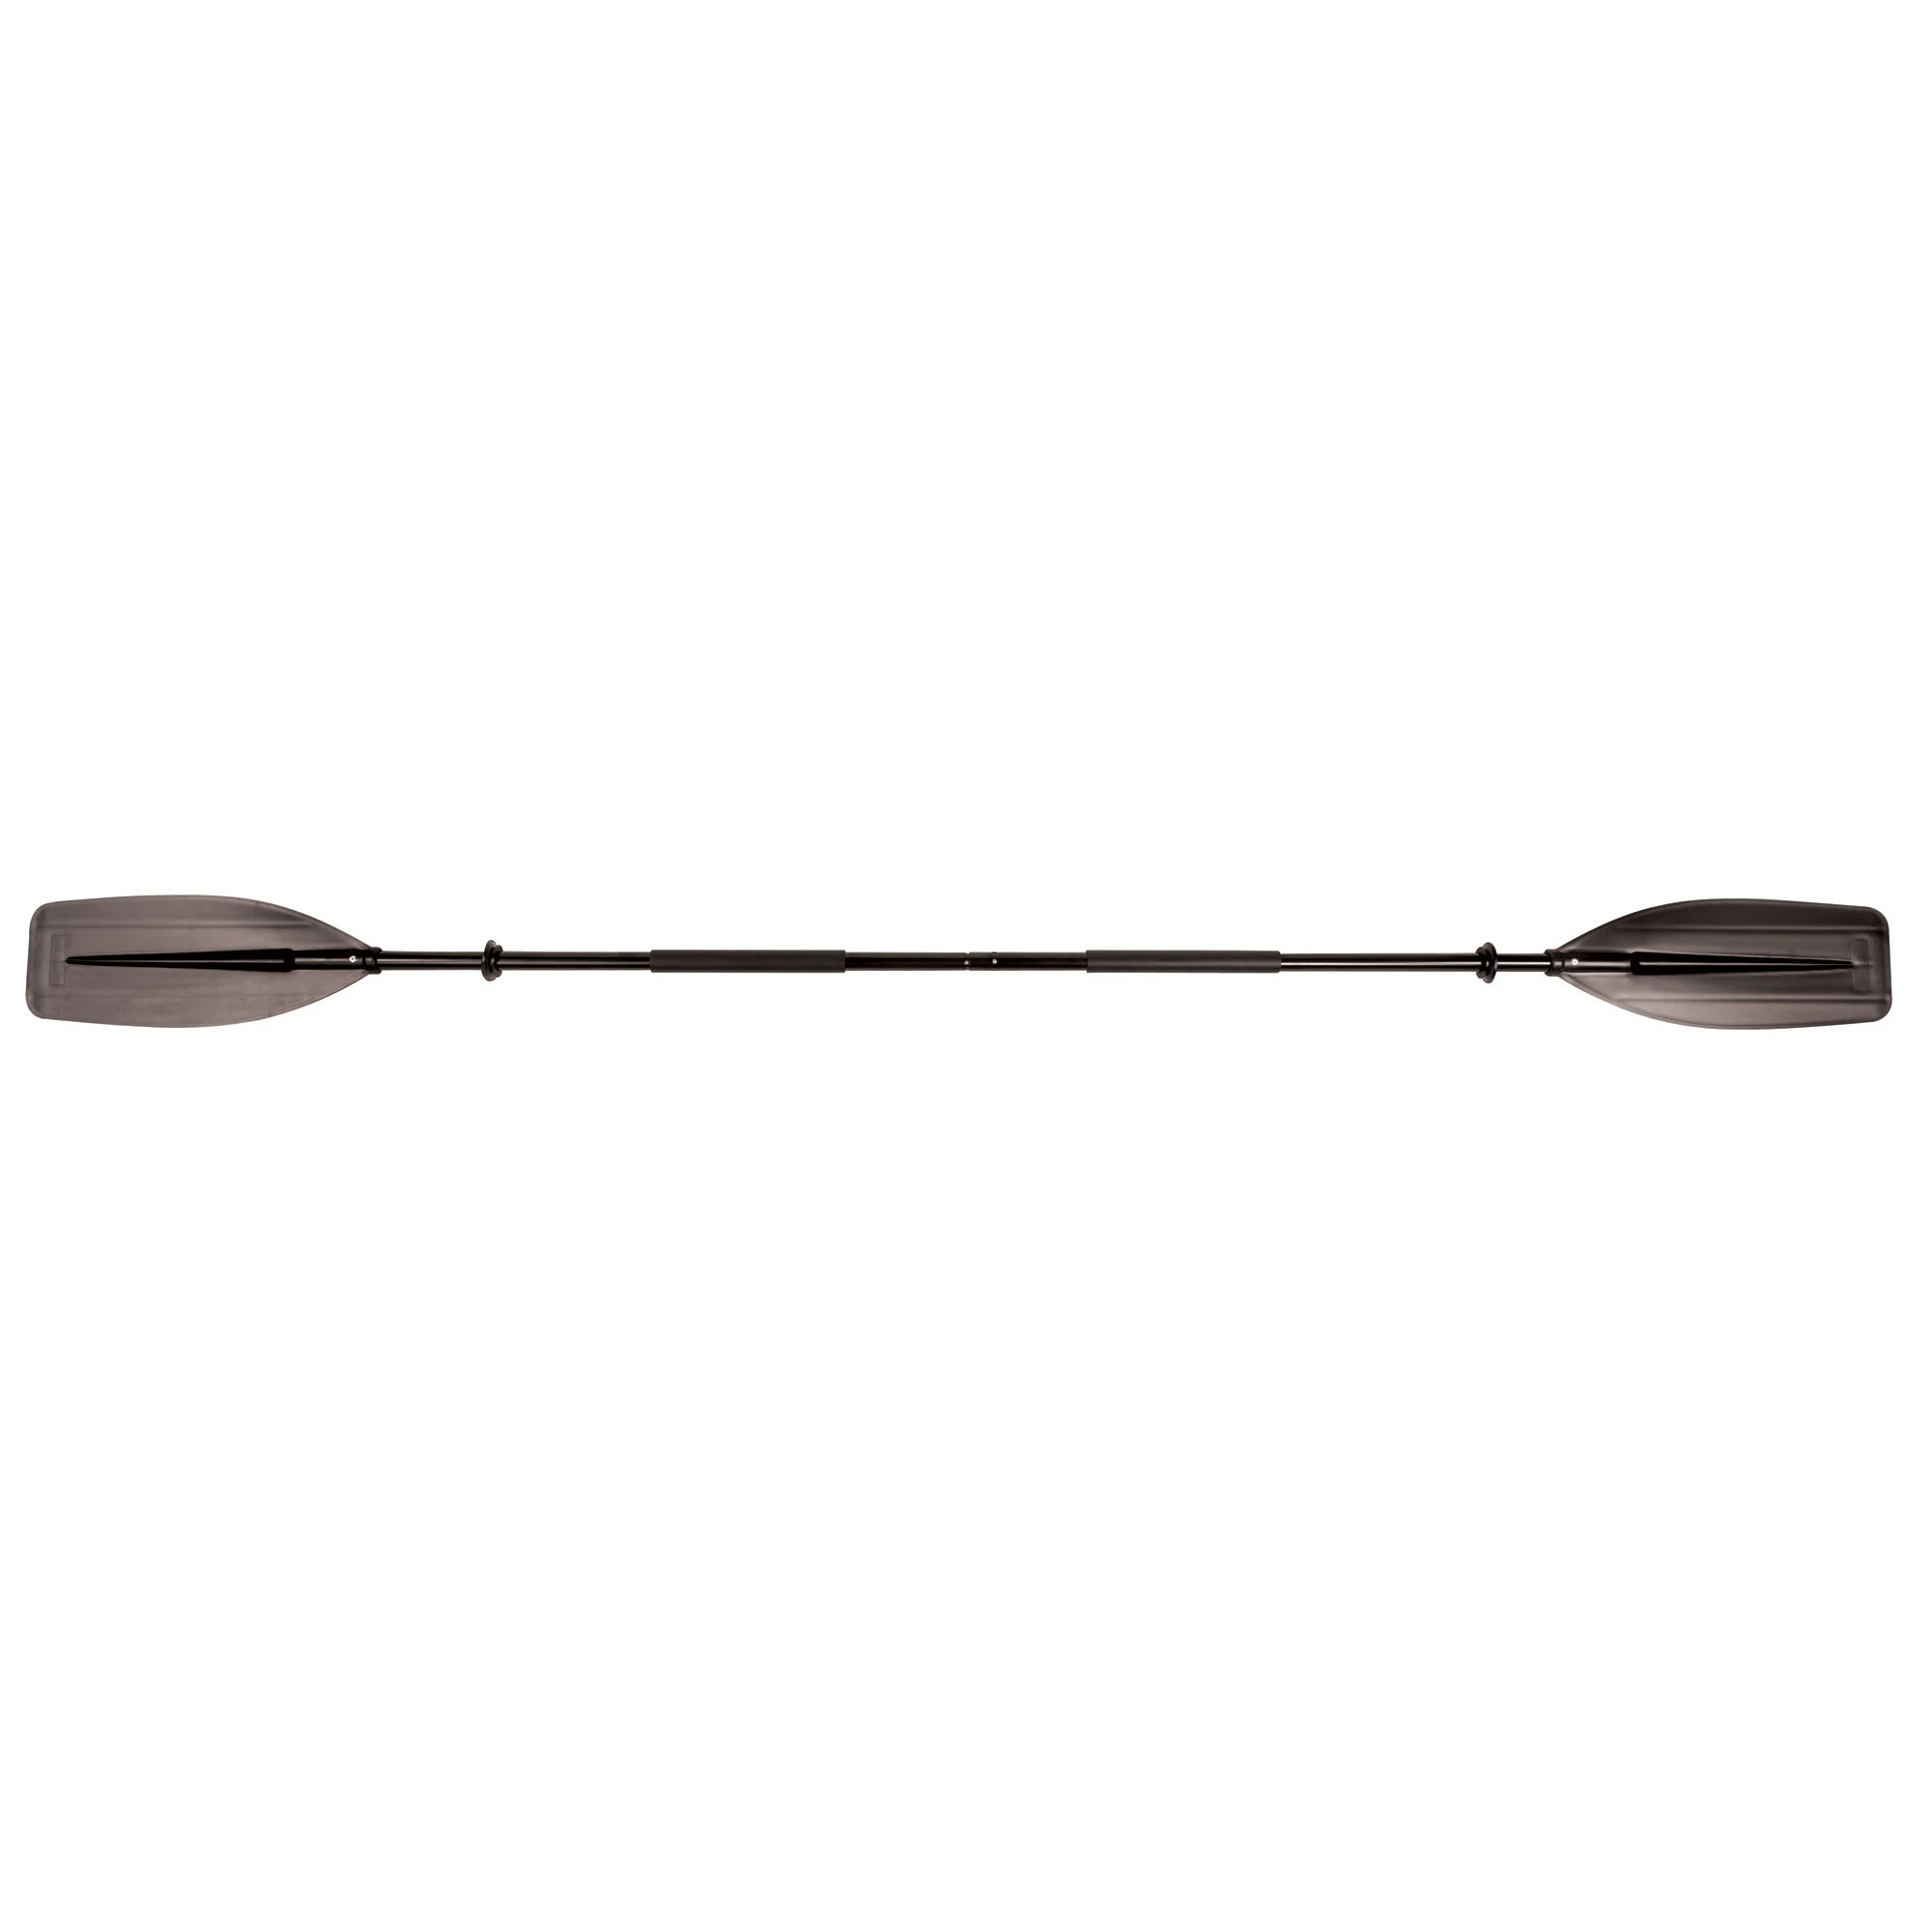 7 FT Five Oceans FO-2880-1 84 inches Mix Kayak Paddle 